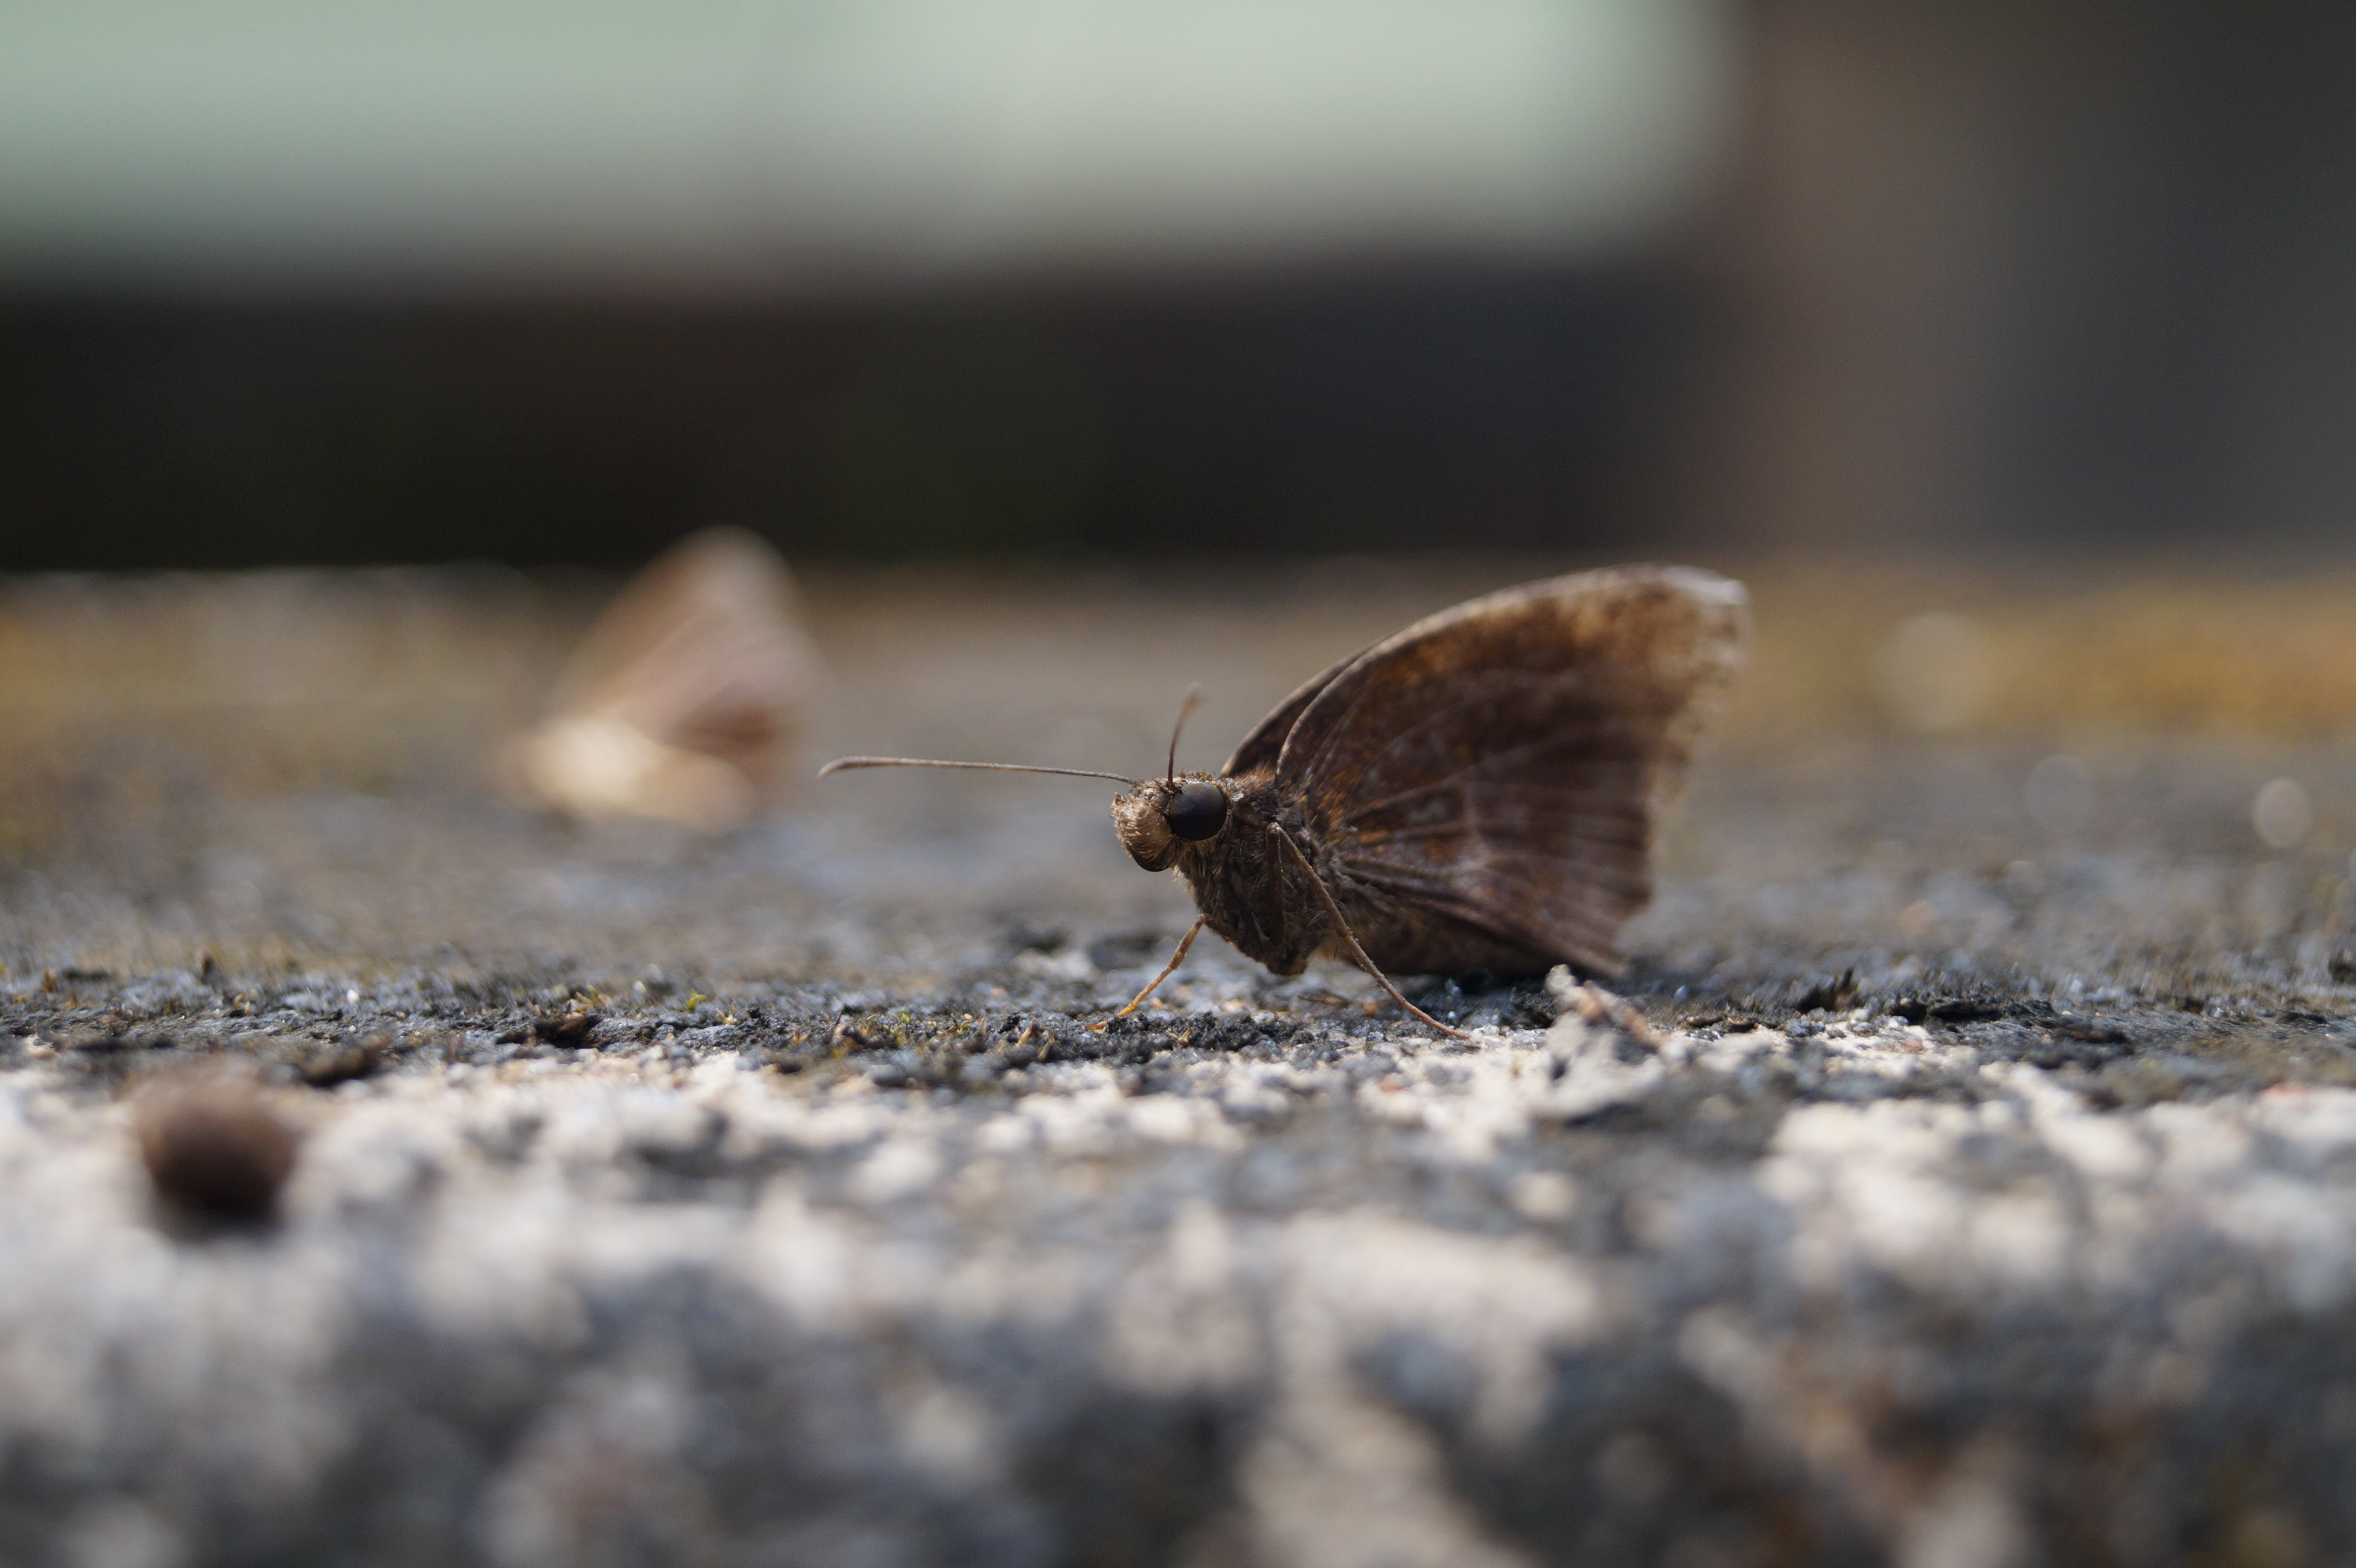 moth, nature, one animal, animal themes, insect, invertebrate